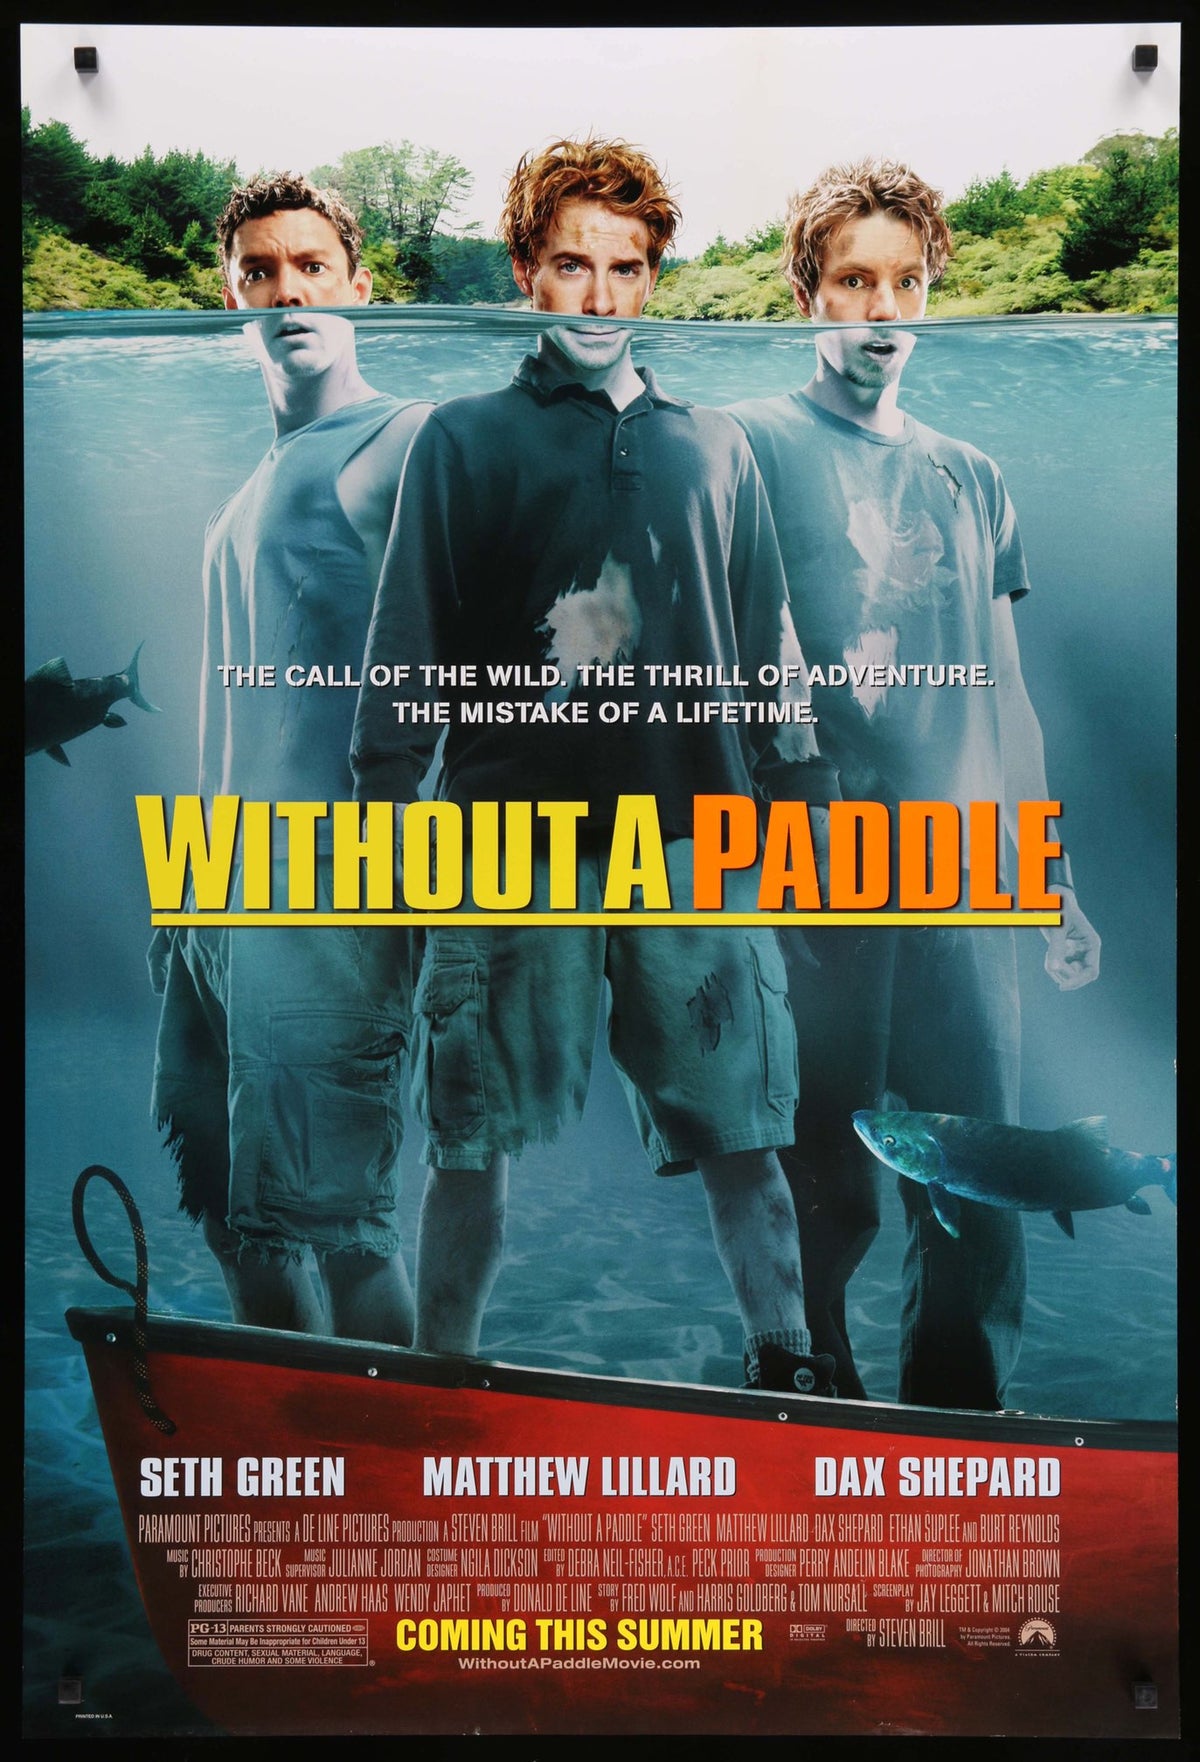 Without a Paddle (2004) original movie poster for sale at Original Film Art